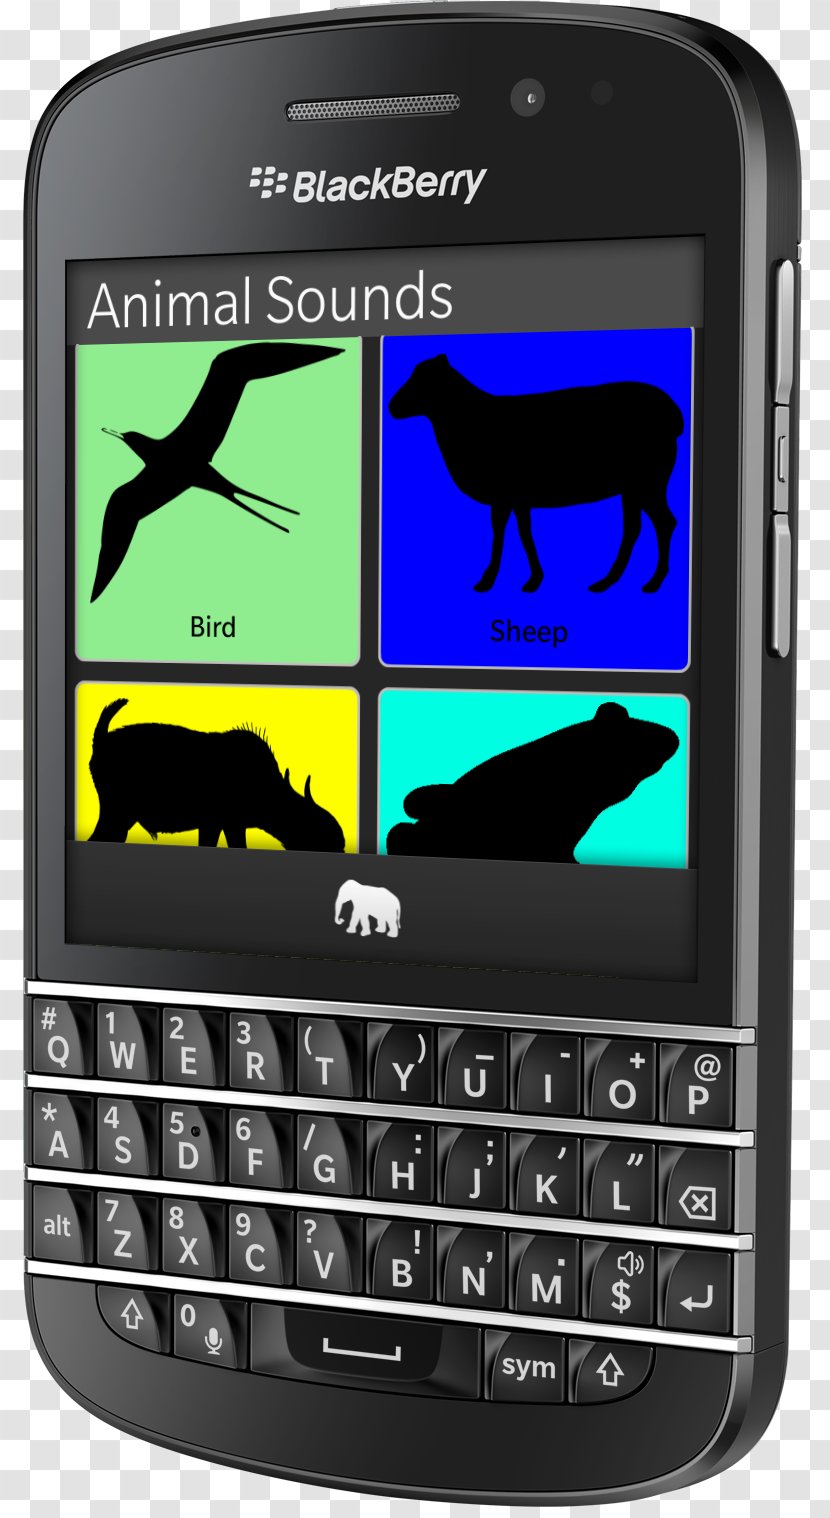 BlackBerry Z10 Passport Smartphone QWERTY 10 - Electronic Device Transparent PNG